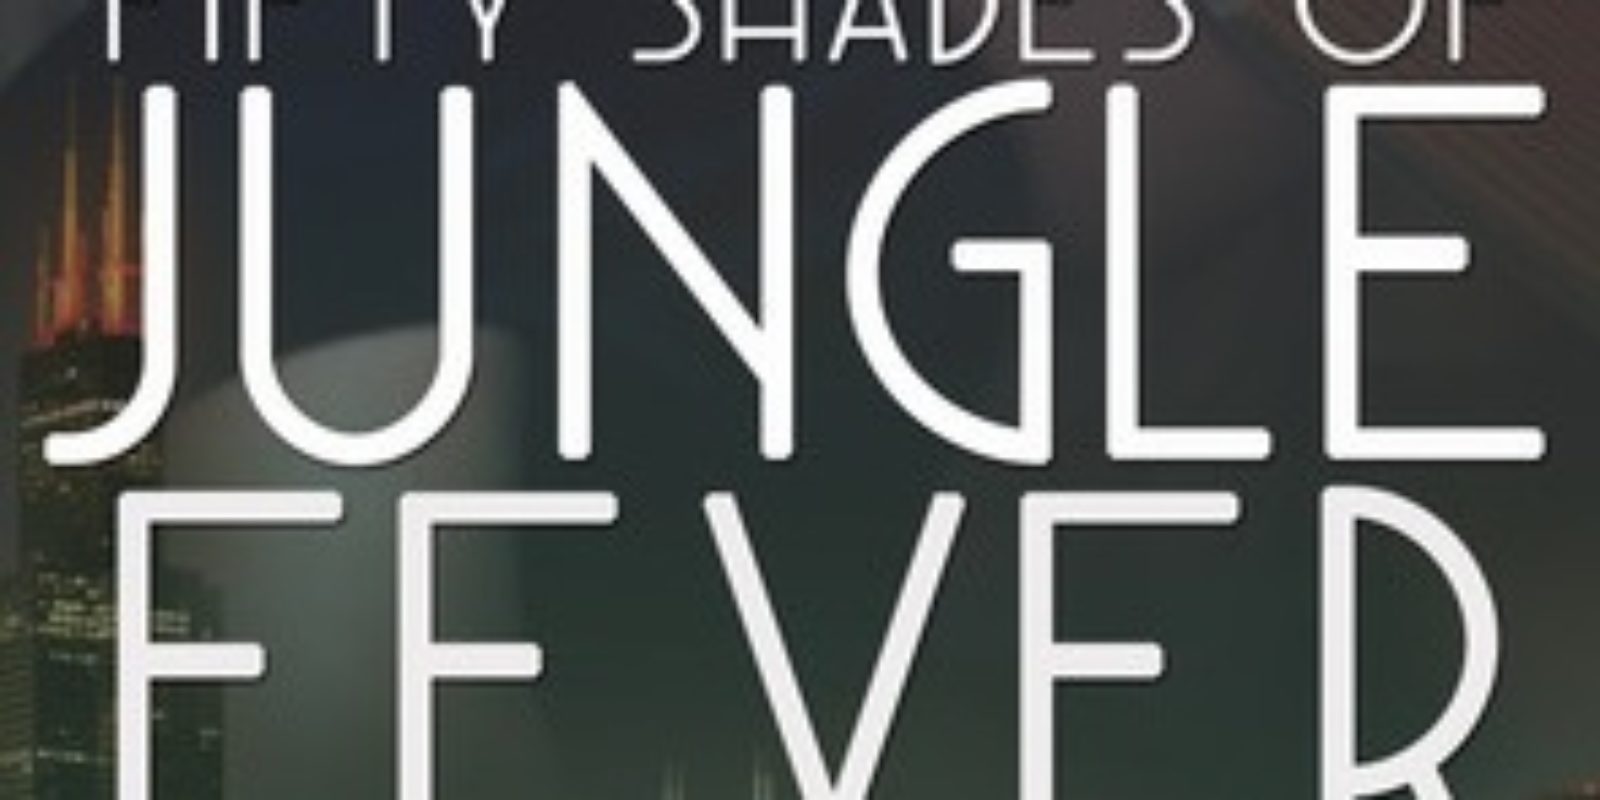 Fifty shades of jungle fever